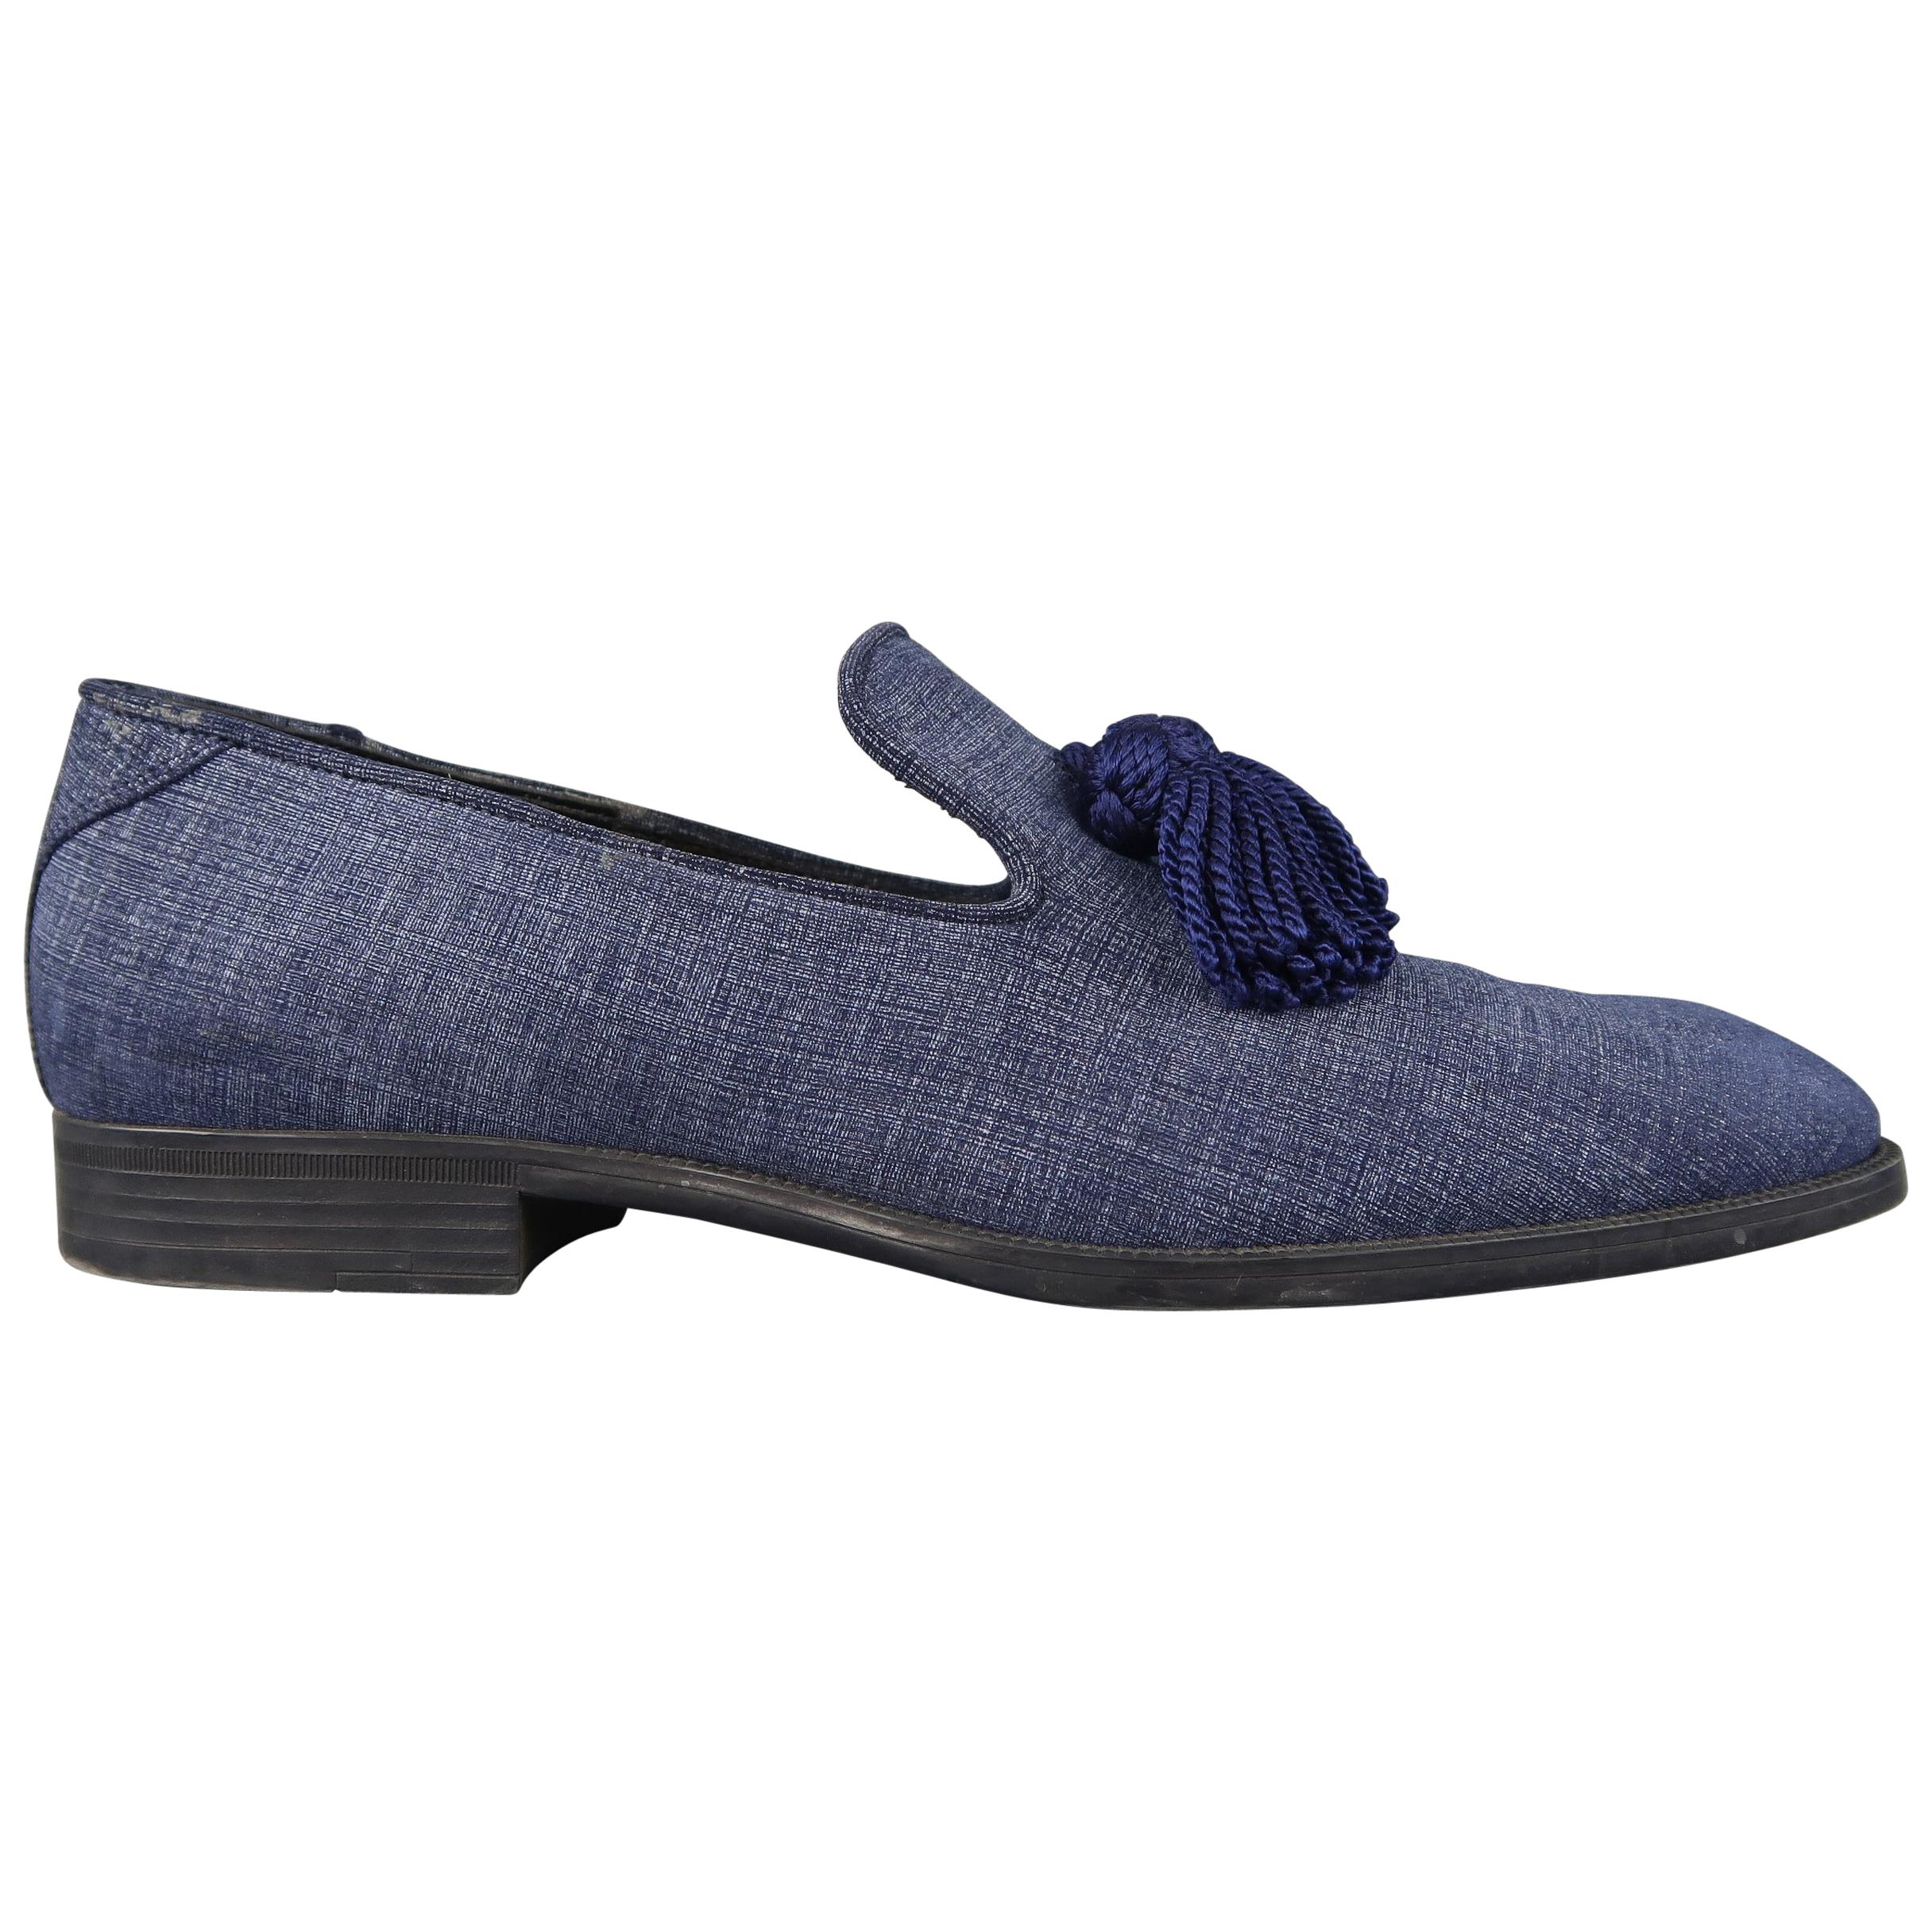 Jimmy Choo Loafers Blue Antique Denim Tassel Foxley Shoes